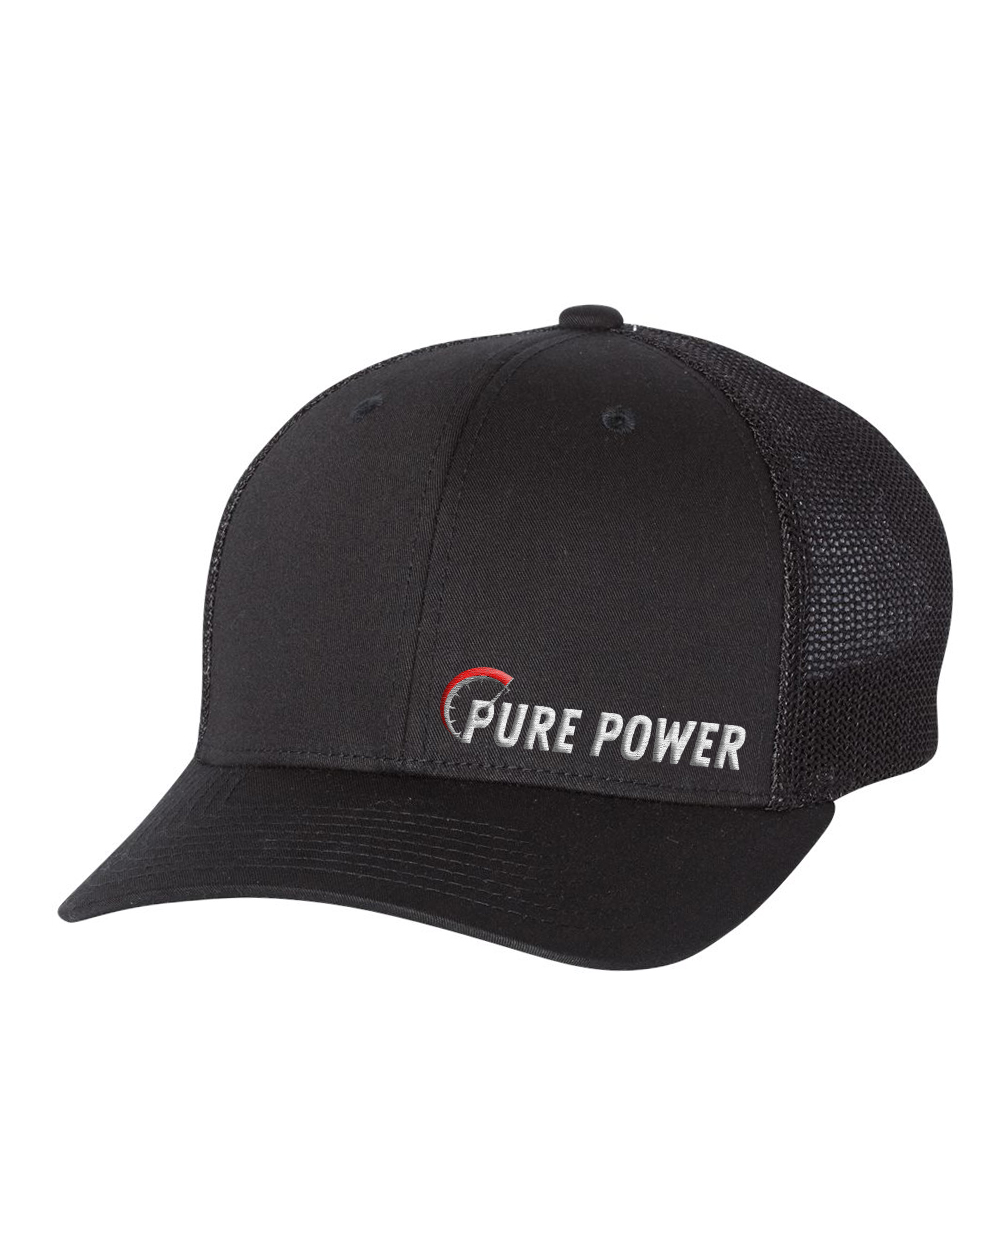 Ride Pure Power Logo Classic Pro Night Out Embroidered Snapback Trucker Hat Black/Black